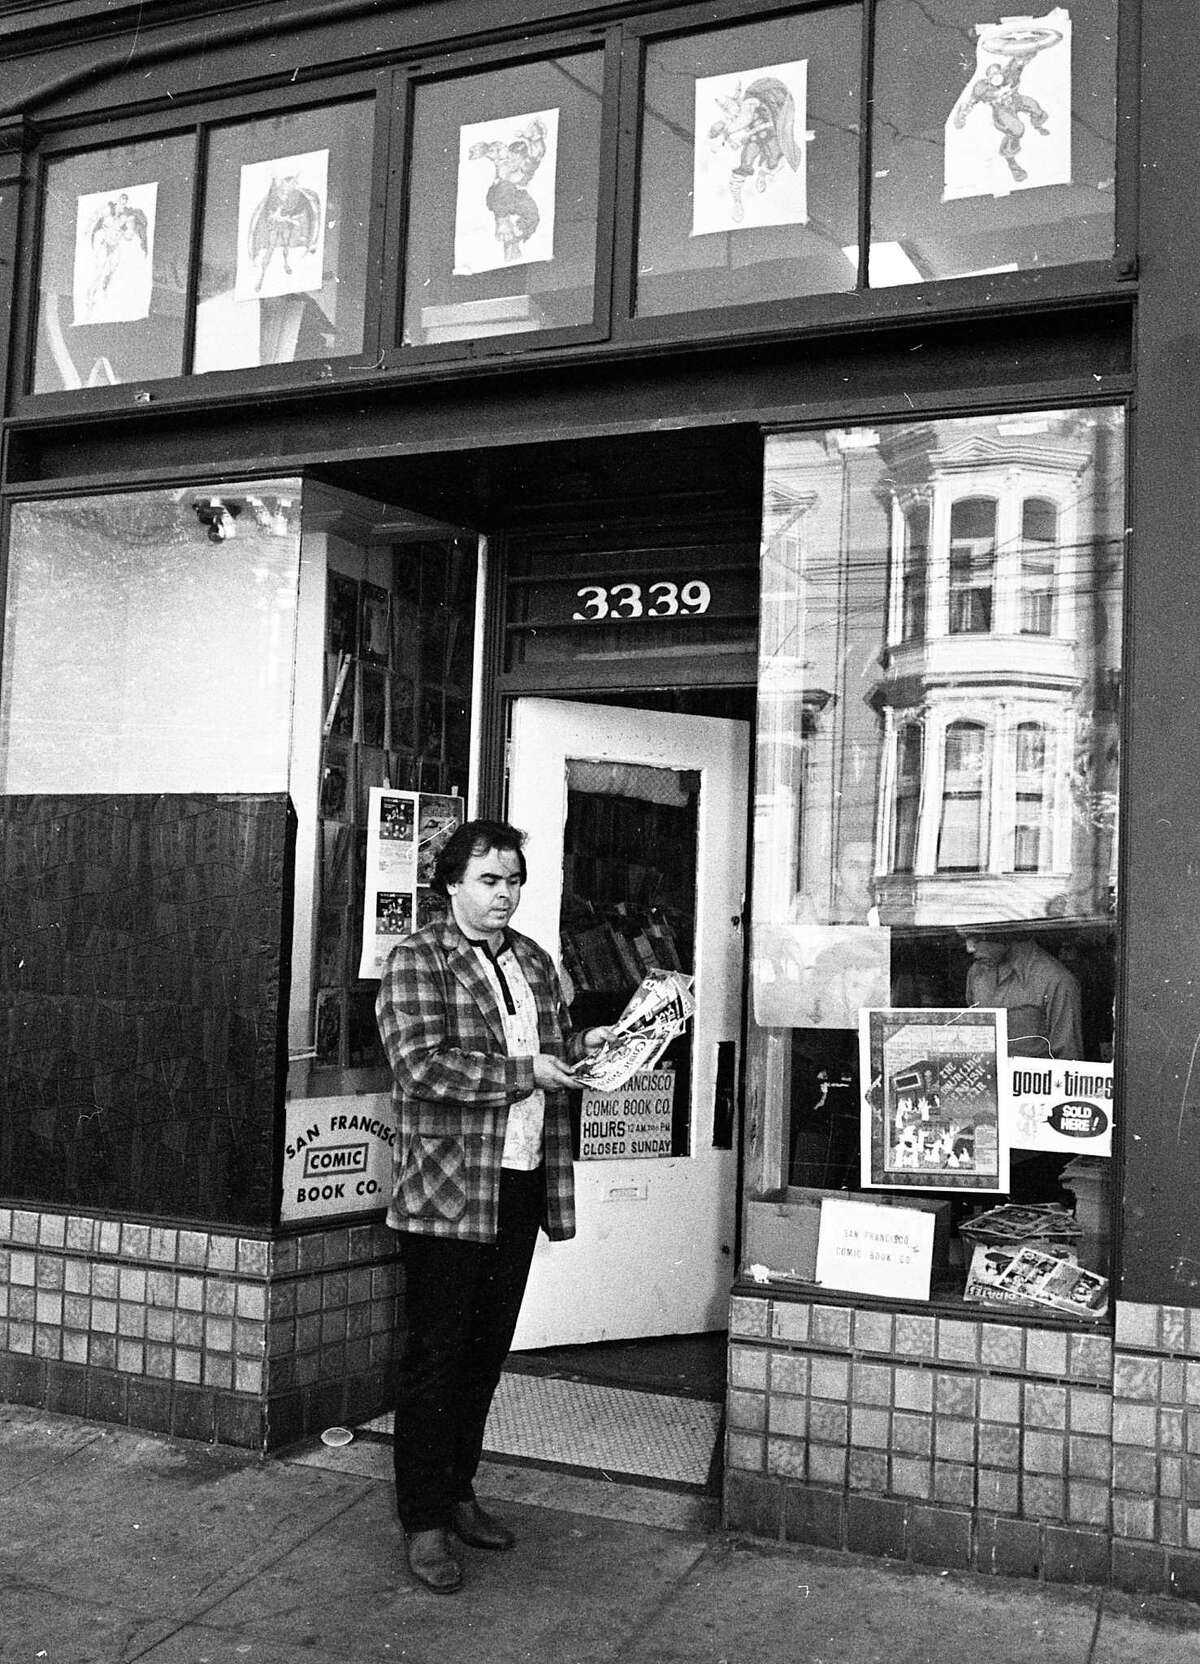 November 17, 1971: Gary Arlington poses outside the Francisco Comic Book Company in 1971. The Mission District comic book store was one of the first comic book stores in the United States.